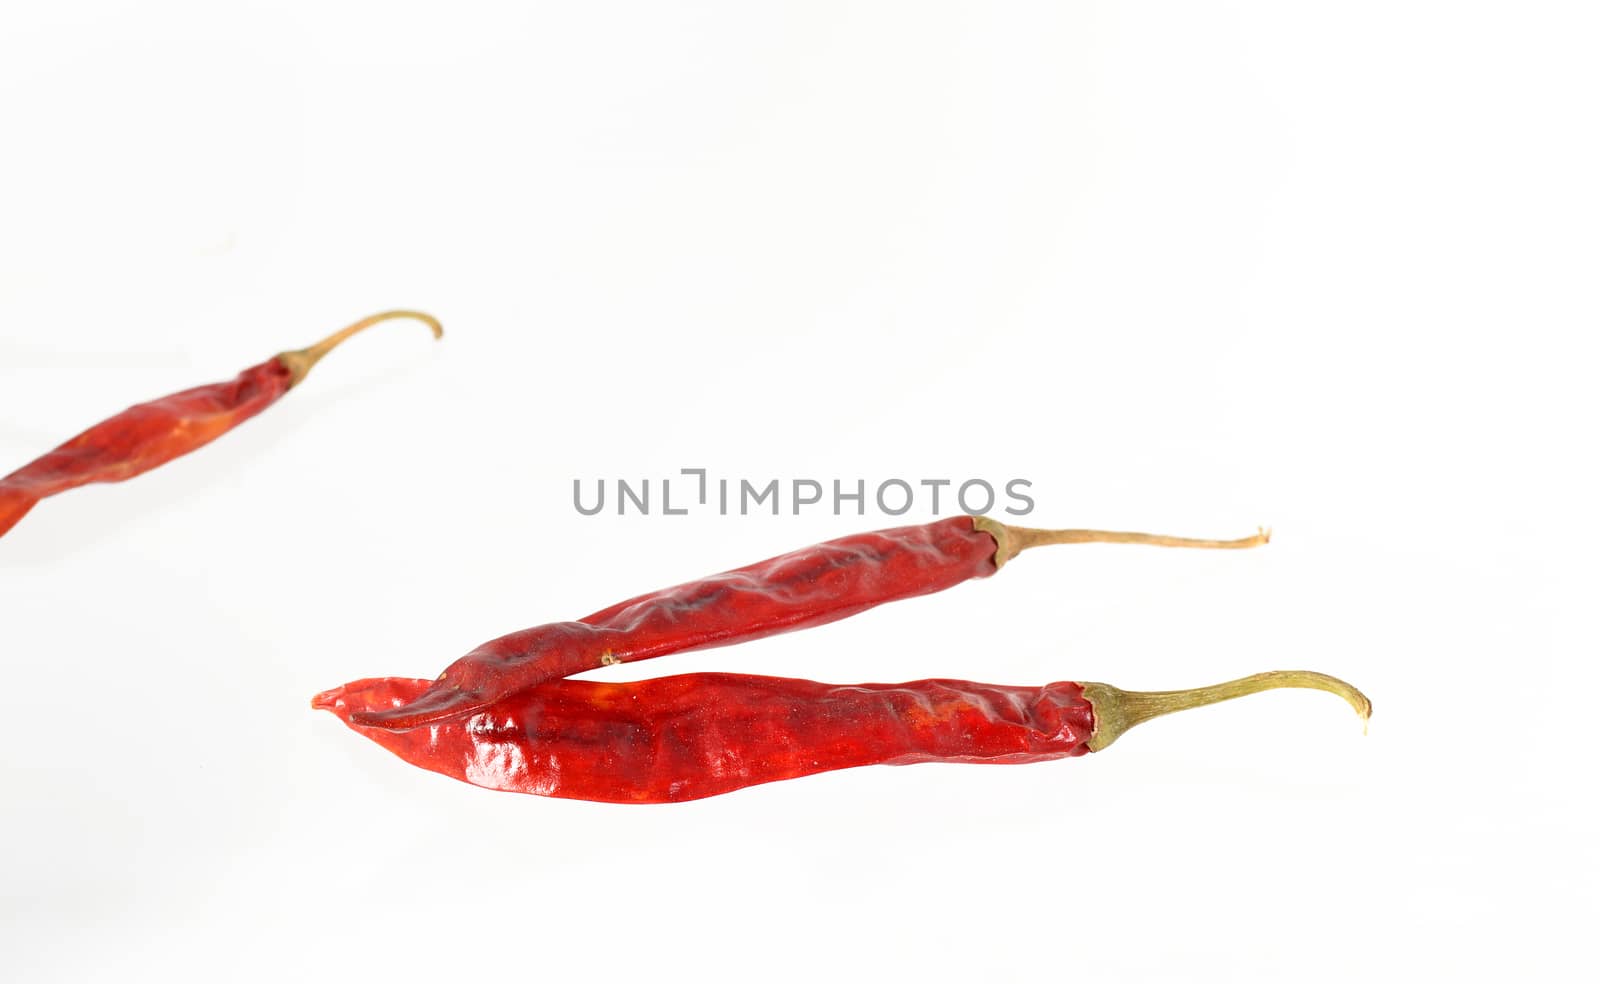 Red Chilli peppers isolated on white background